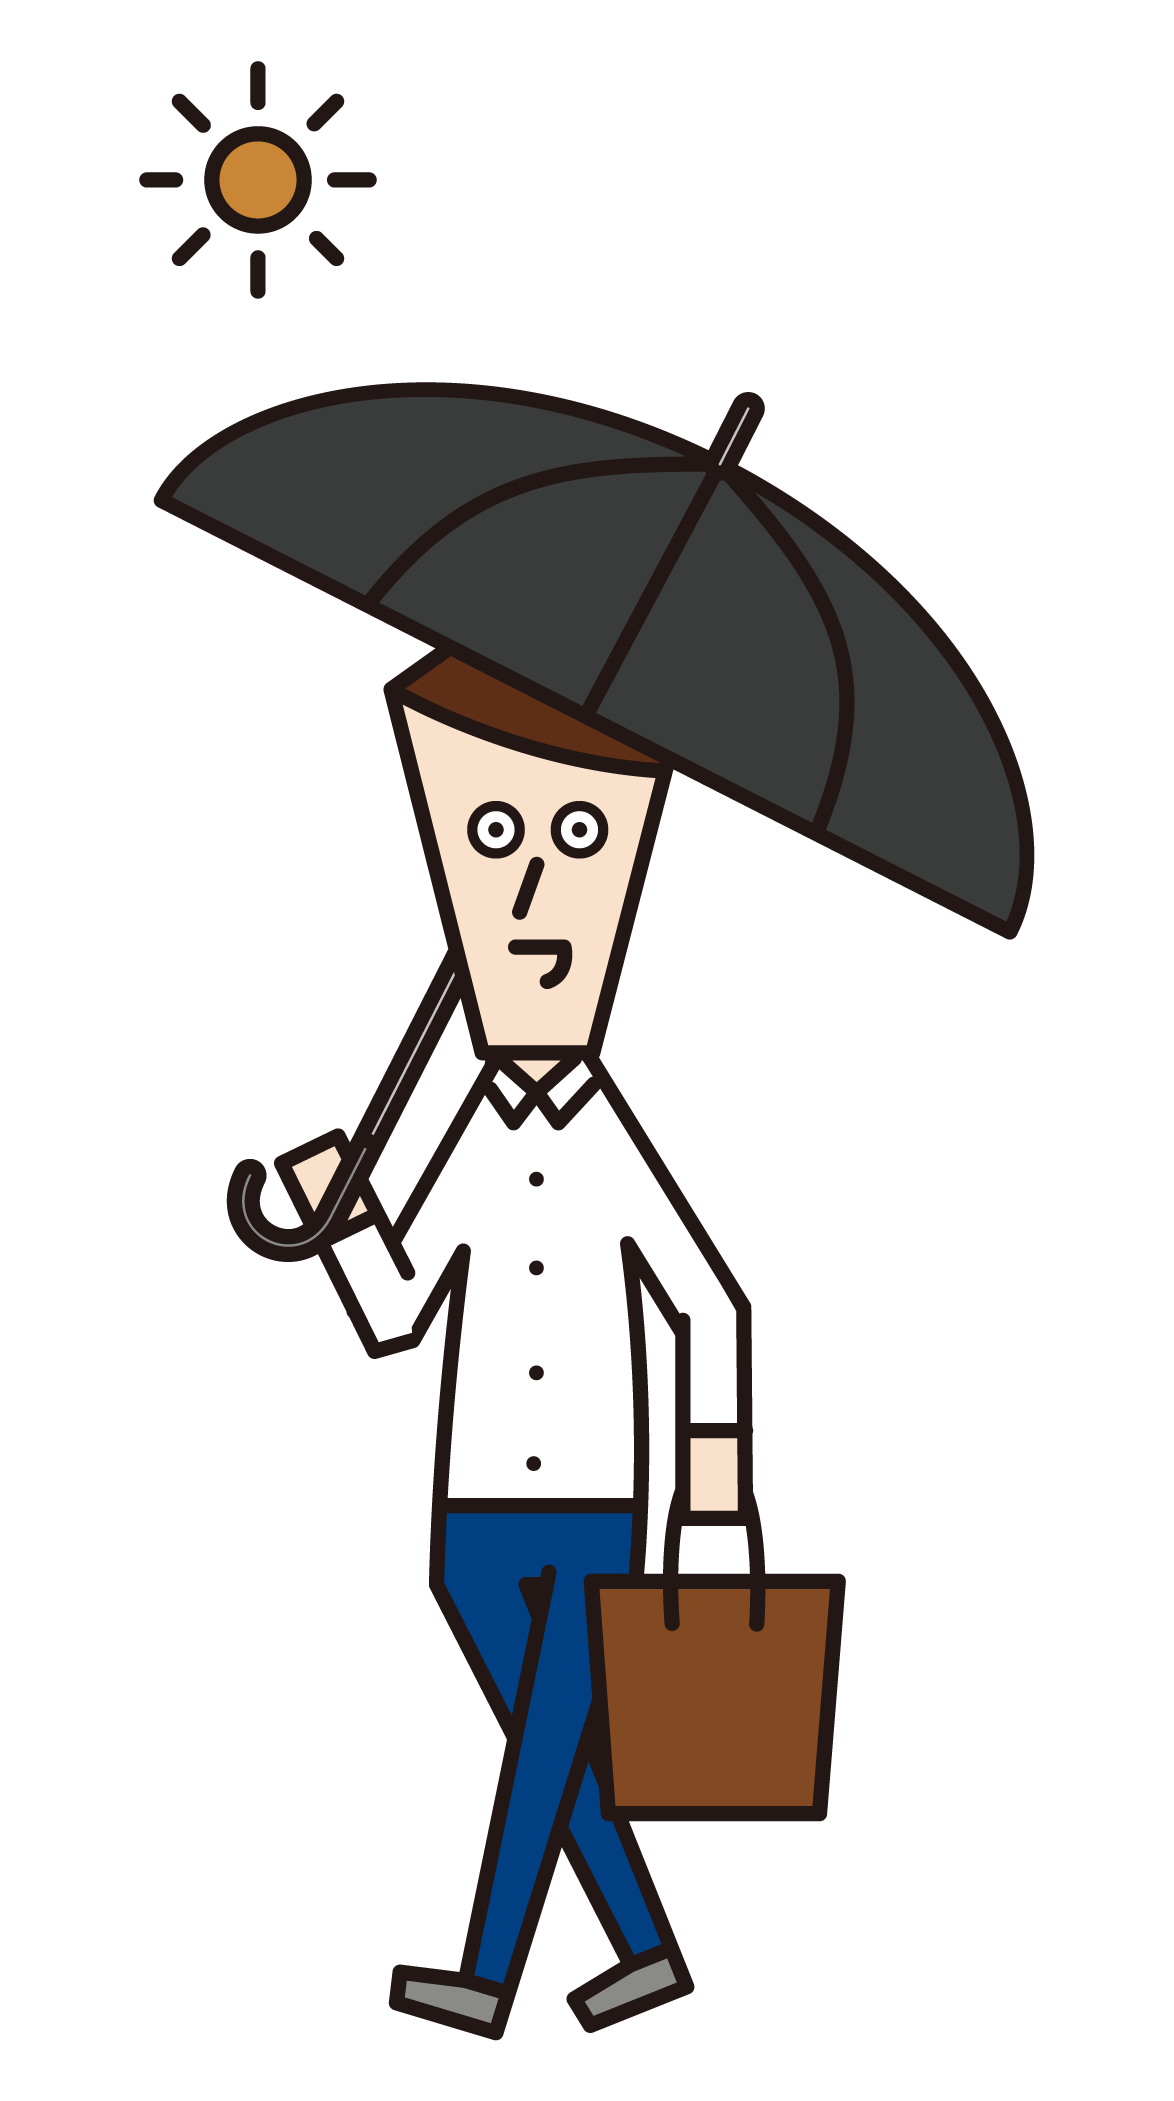 Illustration of a man walking with a parasol